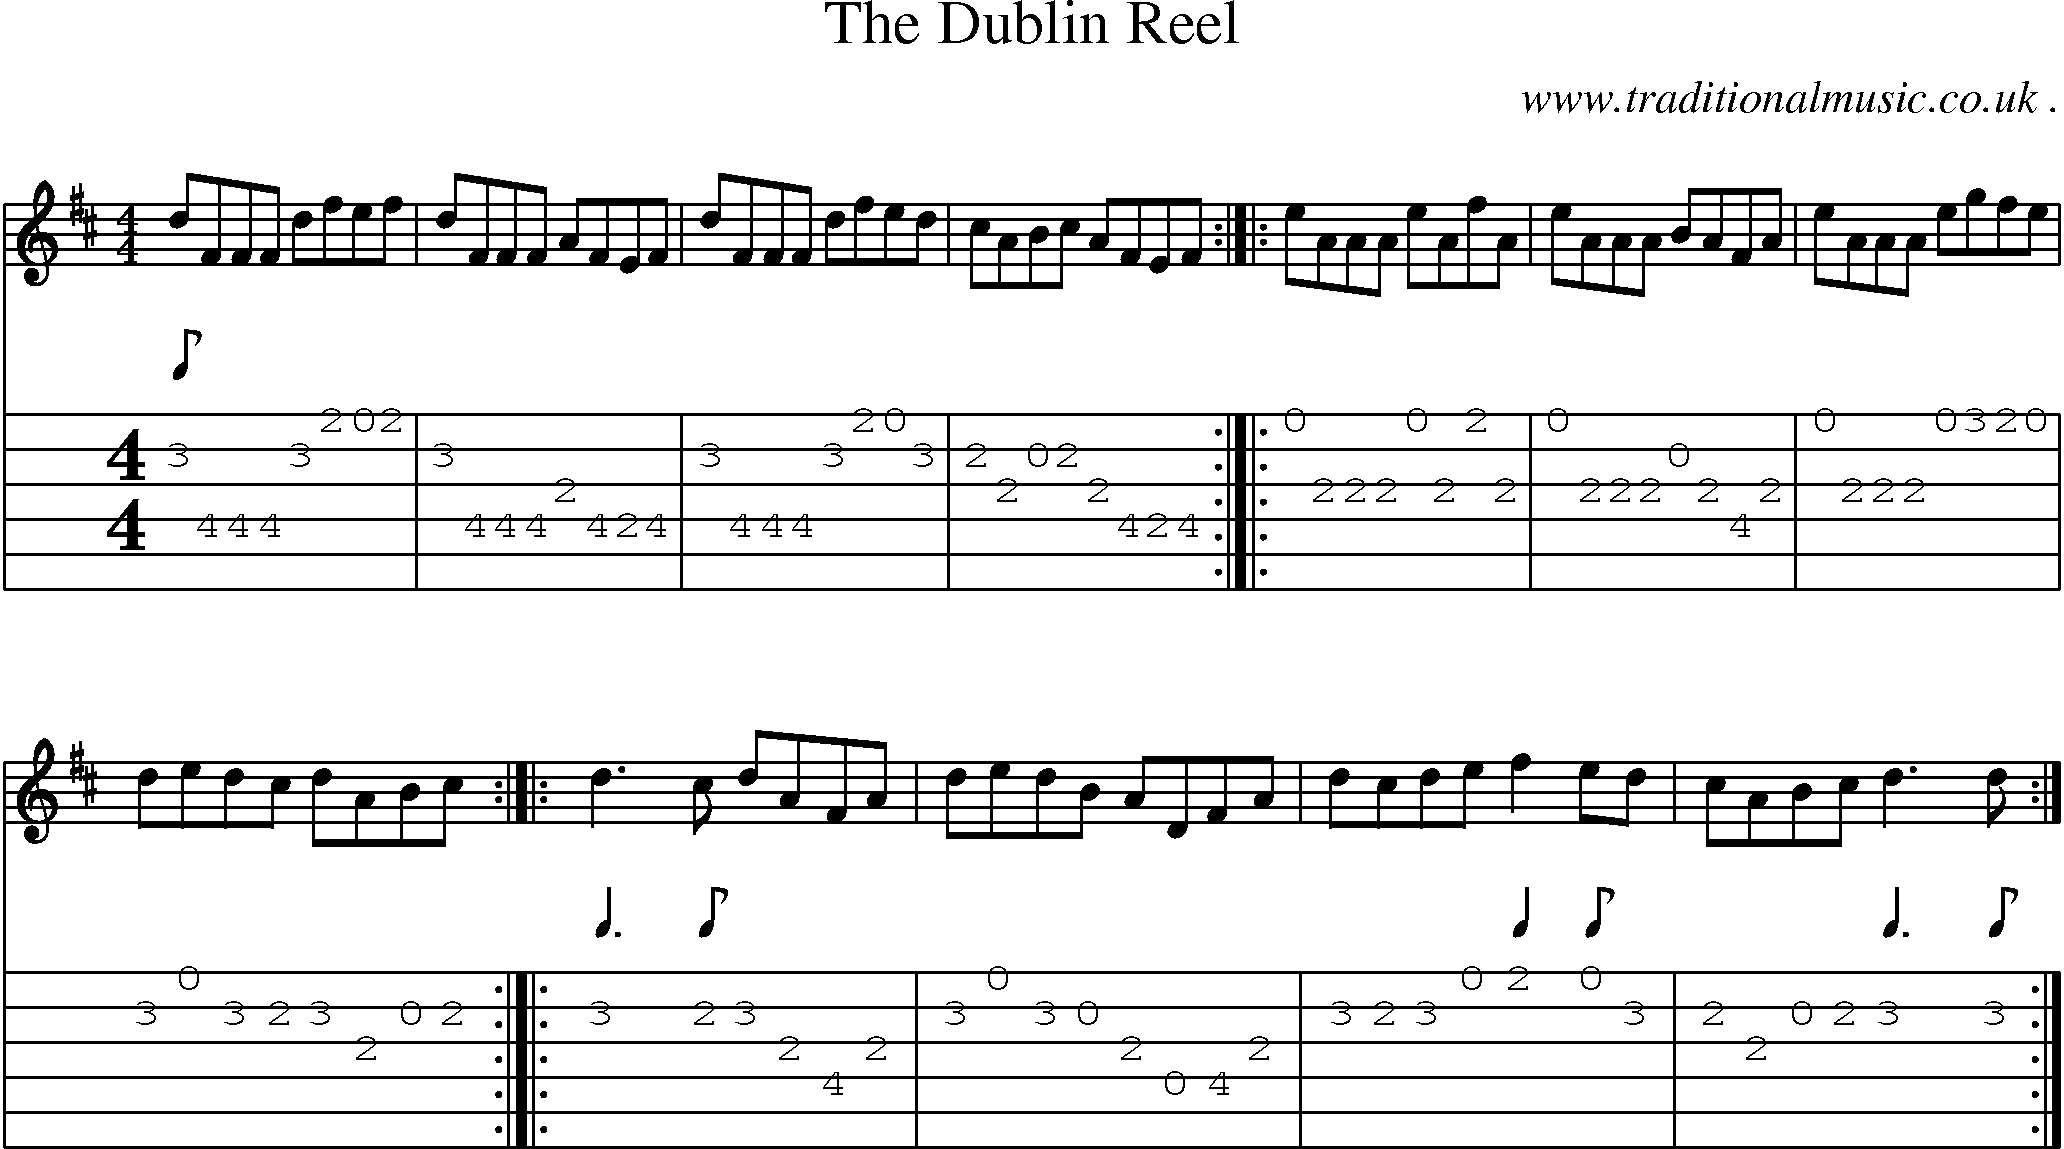 Sheet-Music and Guitar Tabs for The Dublin Reel